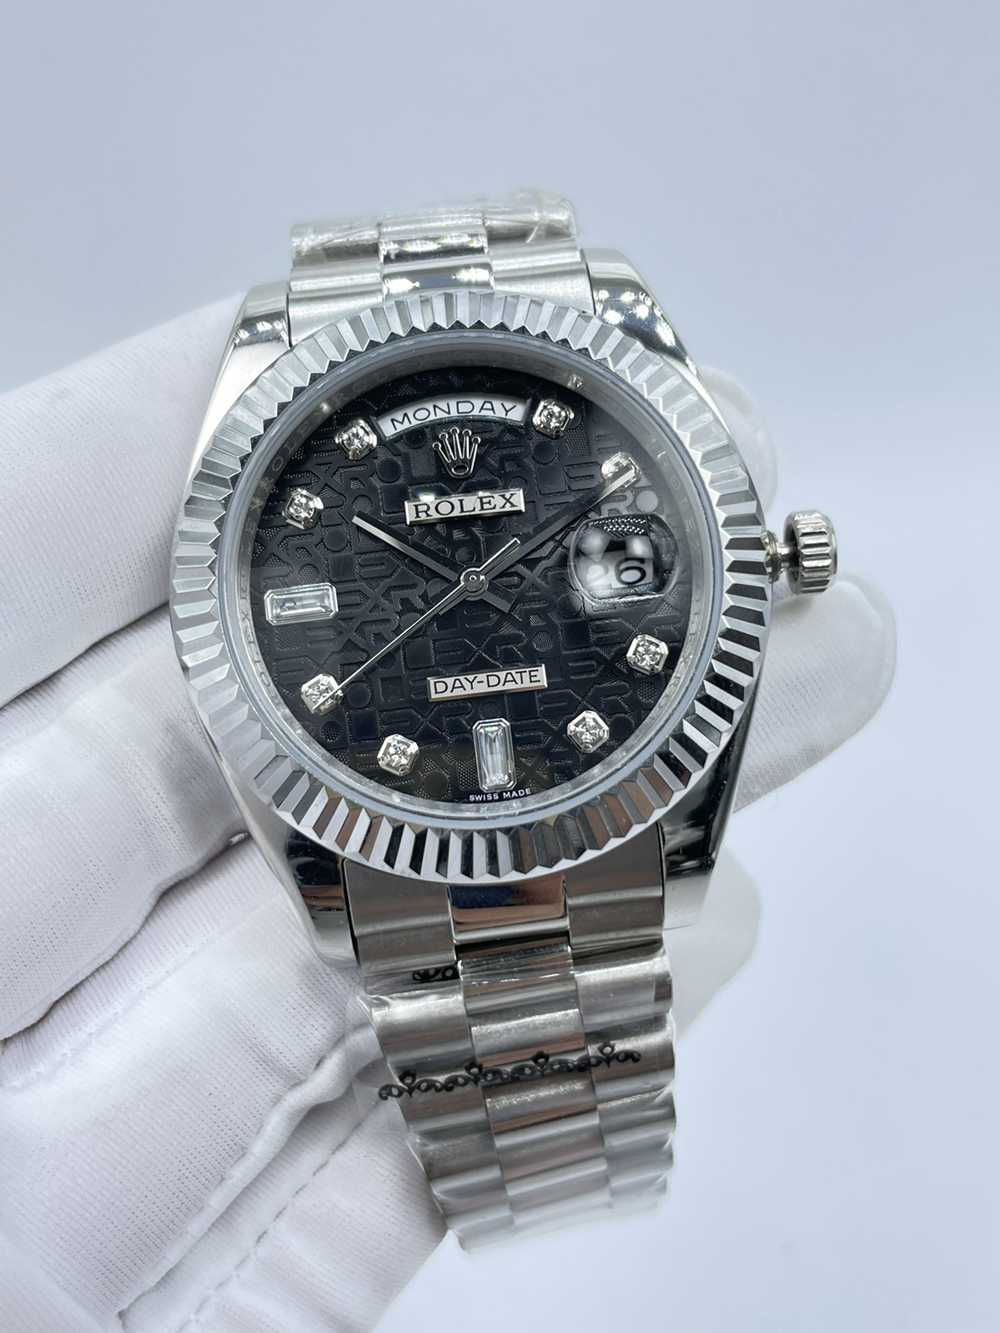 DayDate 41mm silver case computer white/black dial stone numbers president bracelet AAA automatic watches S028